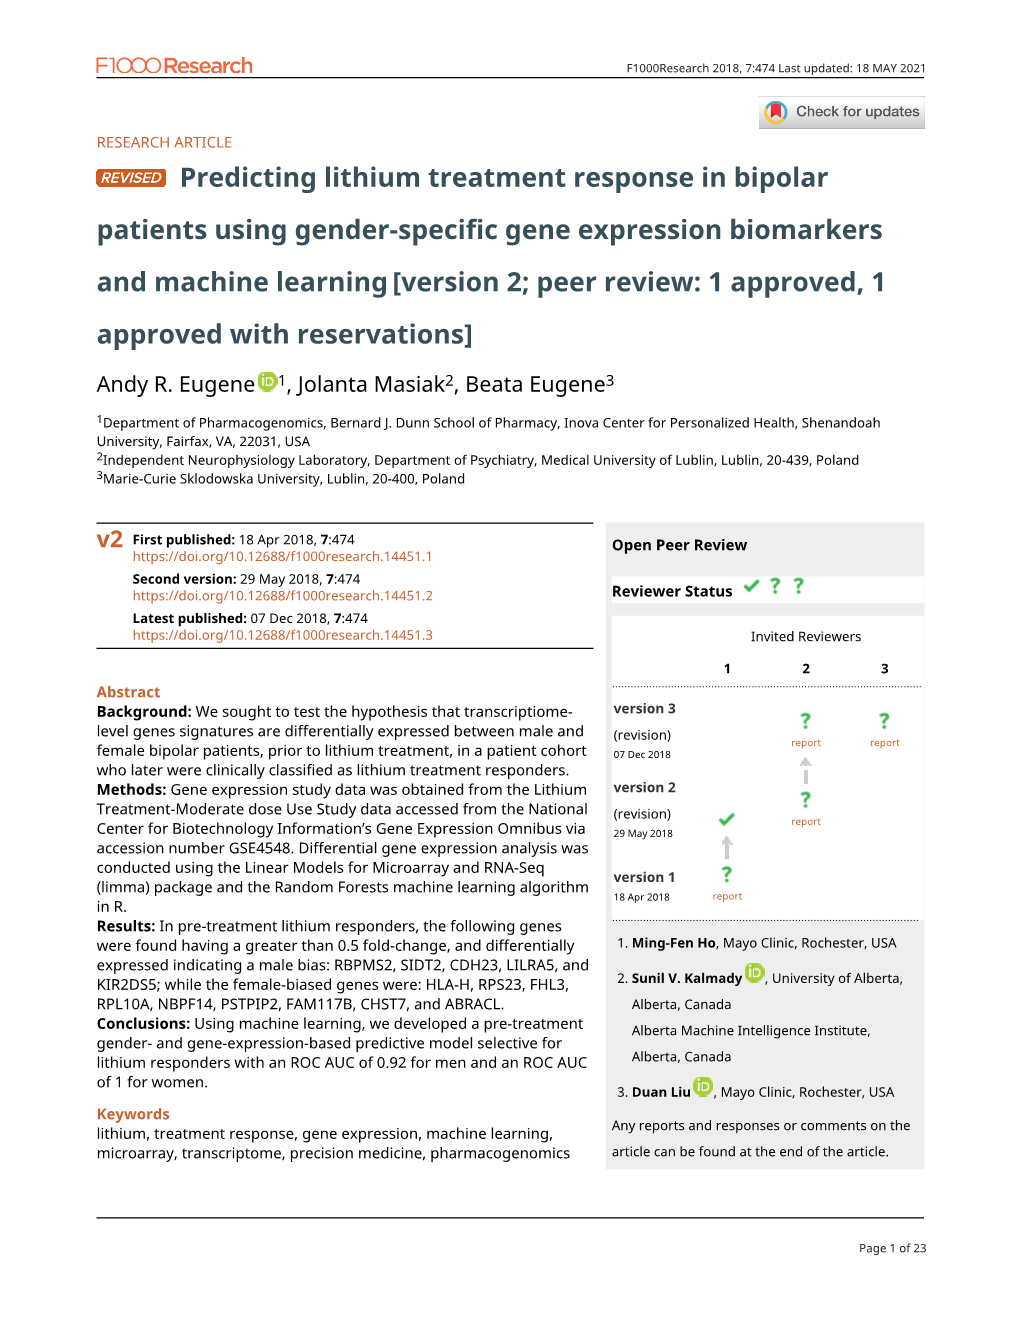 Predicting Lithium Treatment Response in Bipolar Patients Using Gender-Specific Gene Expression Biomarkers and Machine Learning